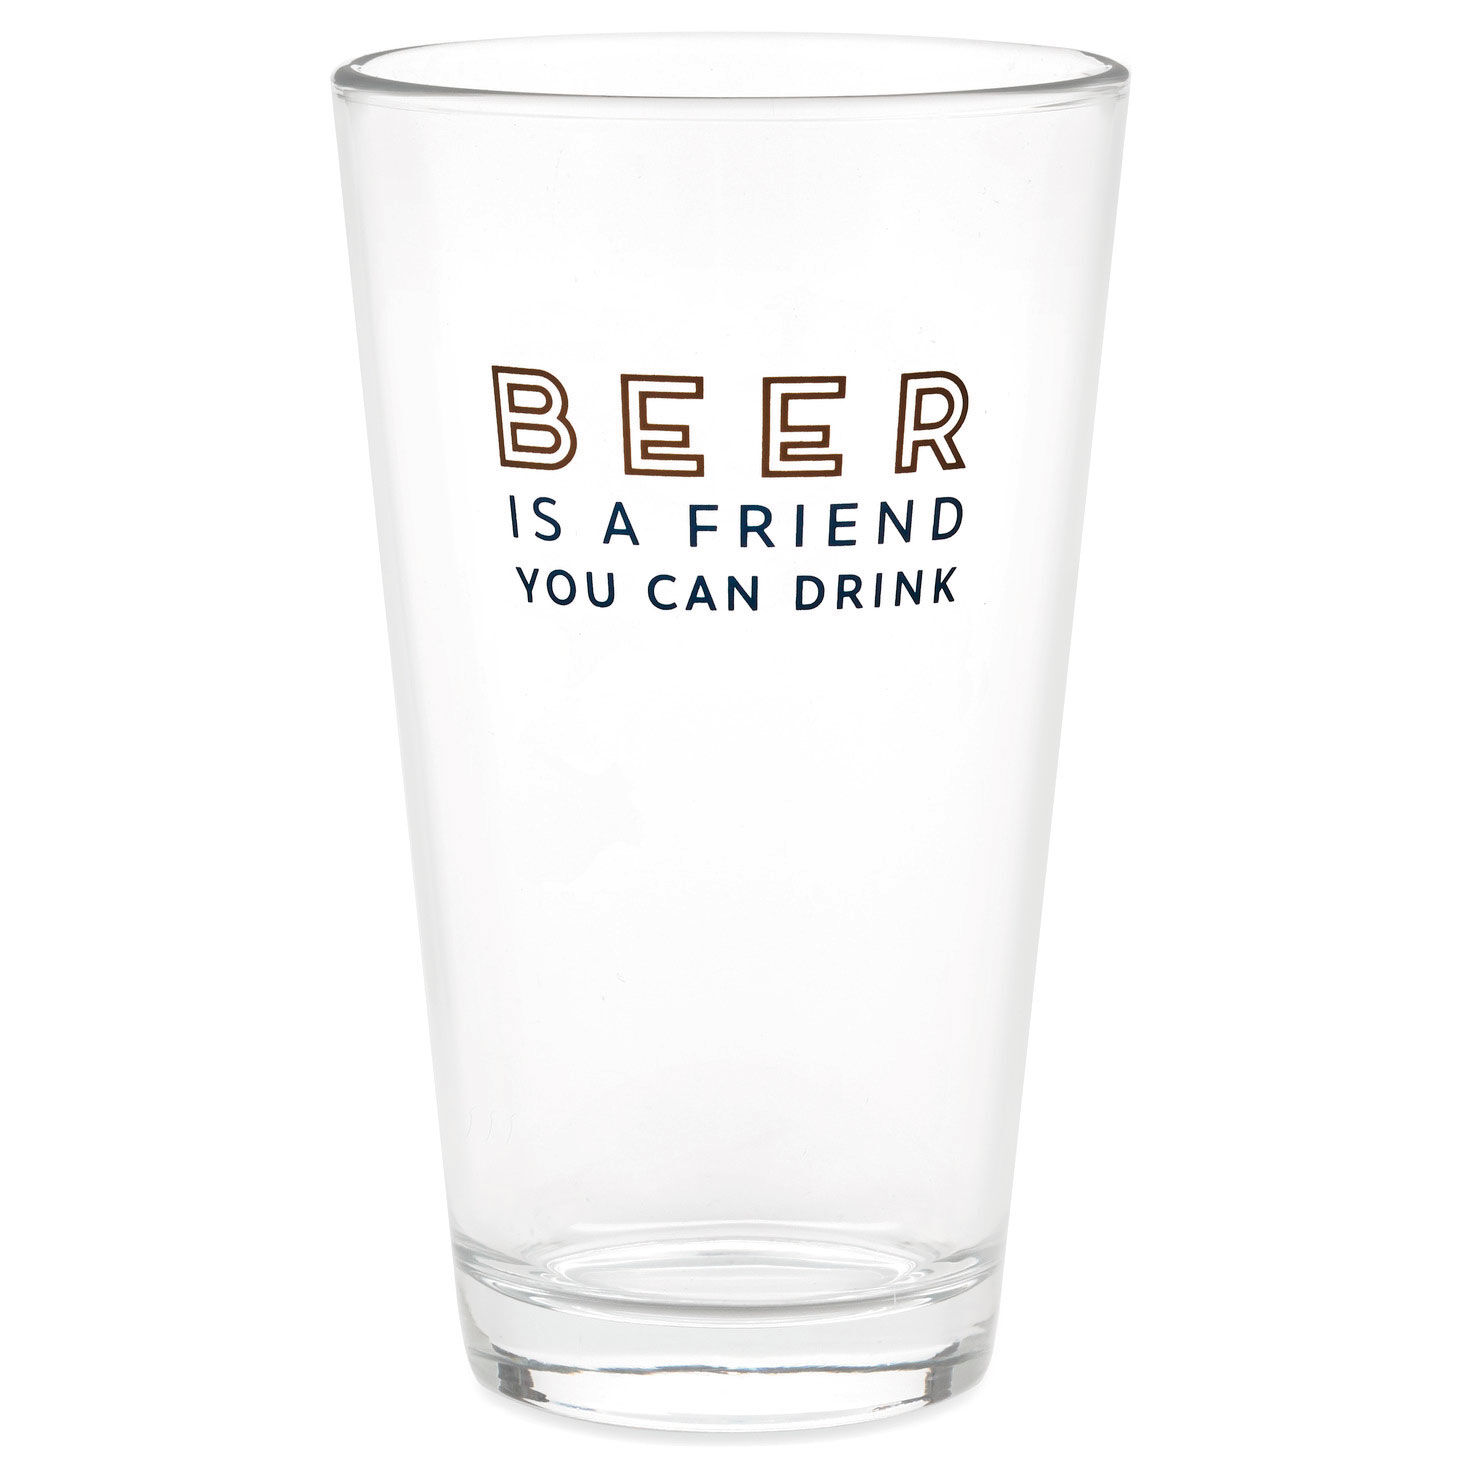 https://www.hallmark.com/dw/image/v2/AALB_PRD/on/demandware.static/-/Sites-hallmark-master/default/dwc39c45d1/images/finished-goods/products/1BRW3227/Beer-Is-a-Friend-Pint-Glass_1BRW3227_01.jpg?sfrm=jpg